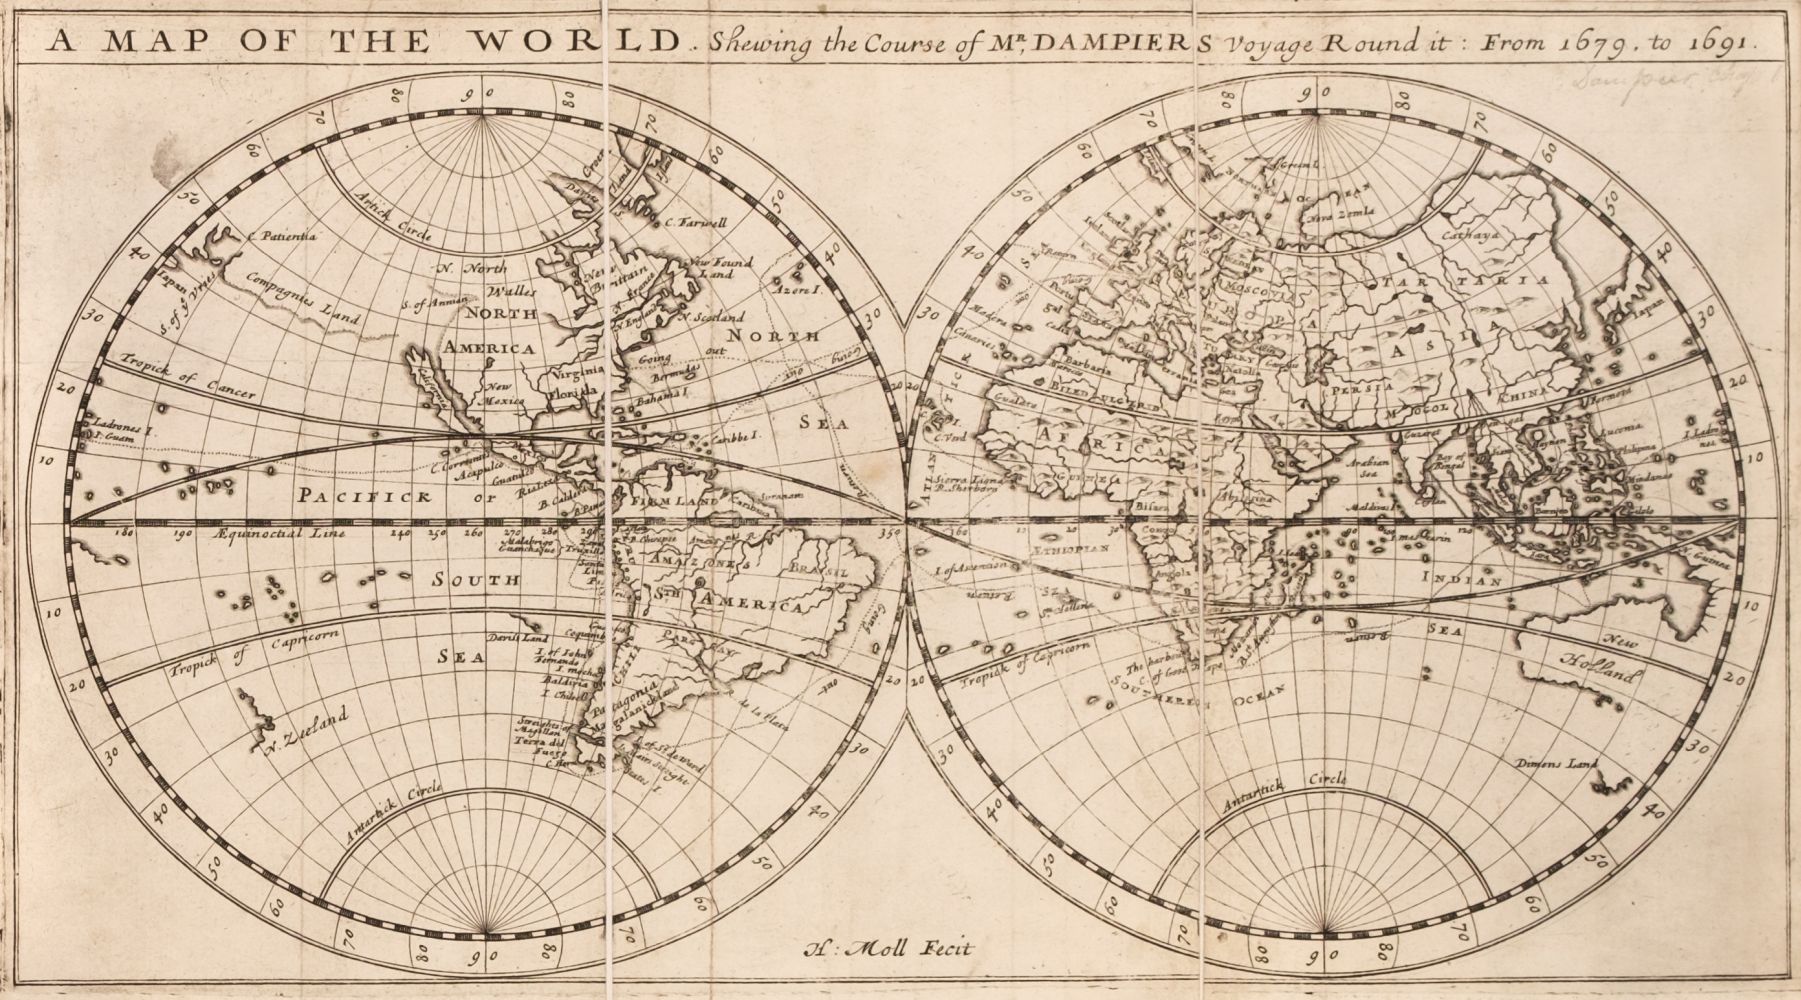 Dampier (William). A New Voyage Around The World, 1st edition, London: James Knapton, 1697 - Image 4 of 13